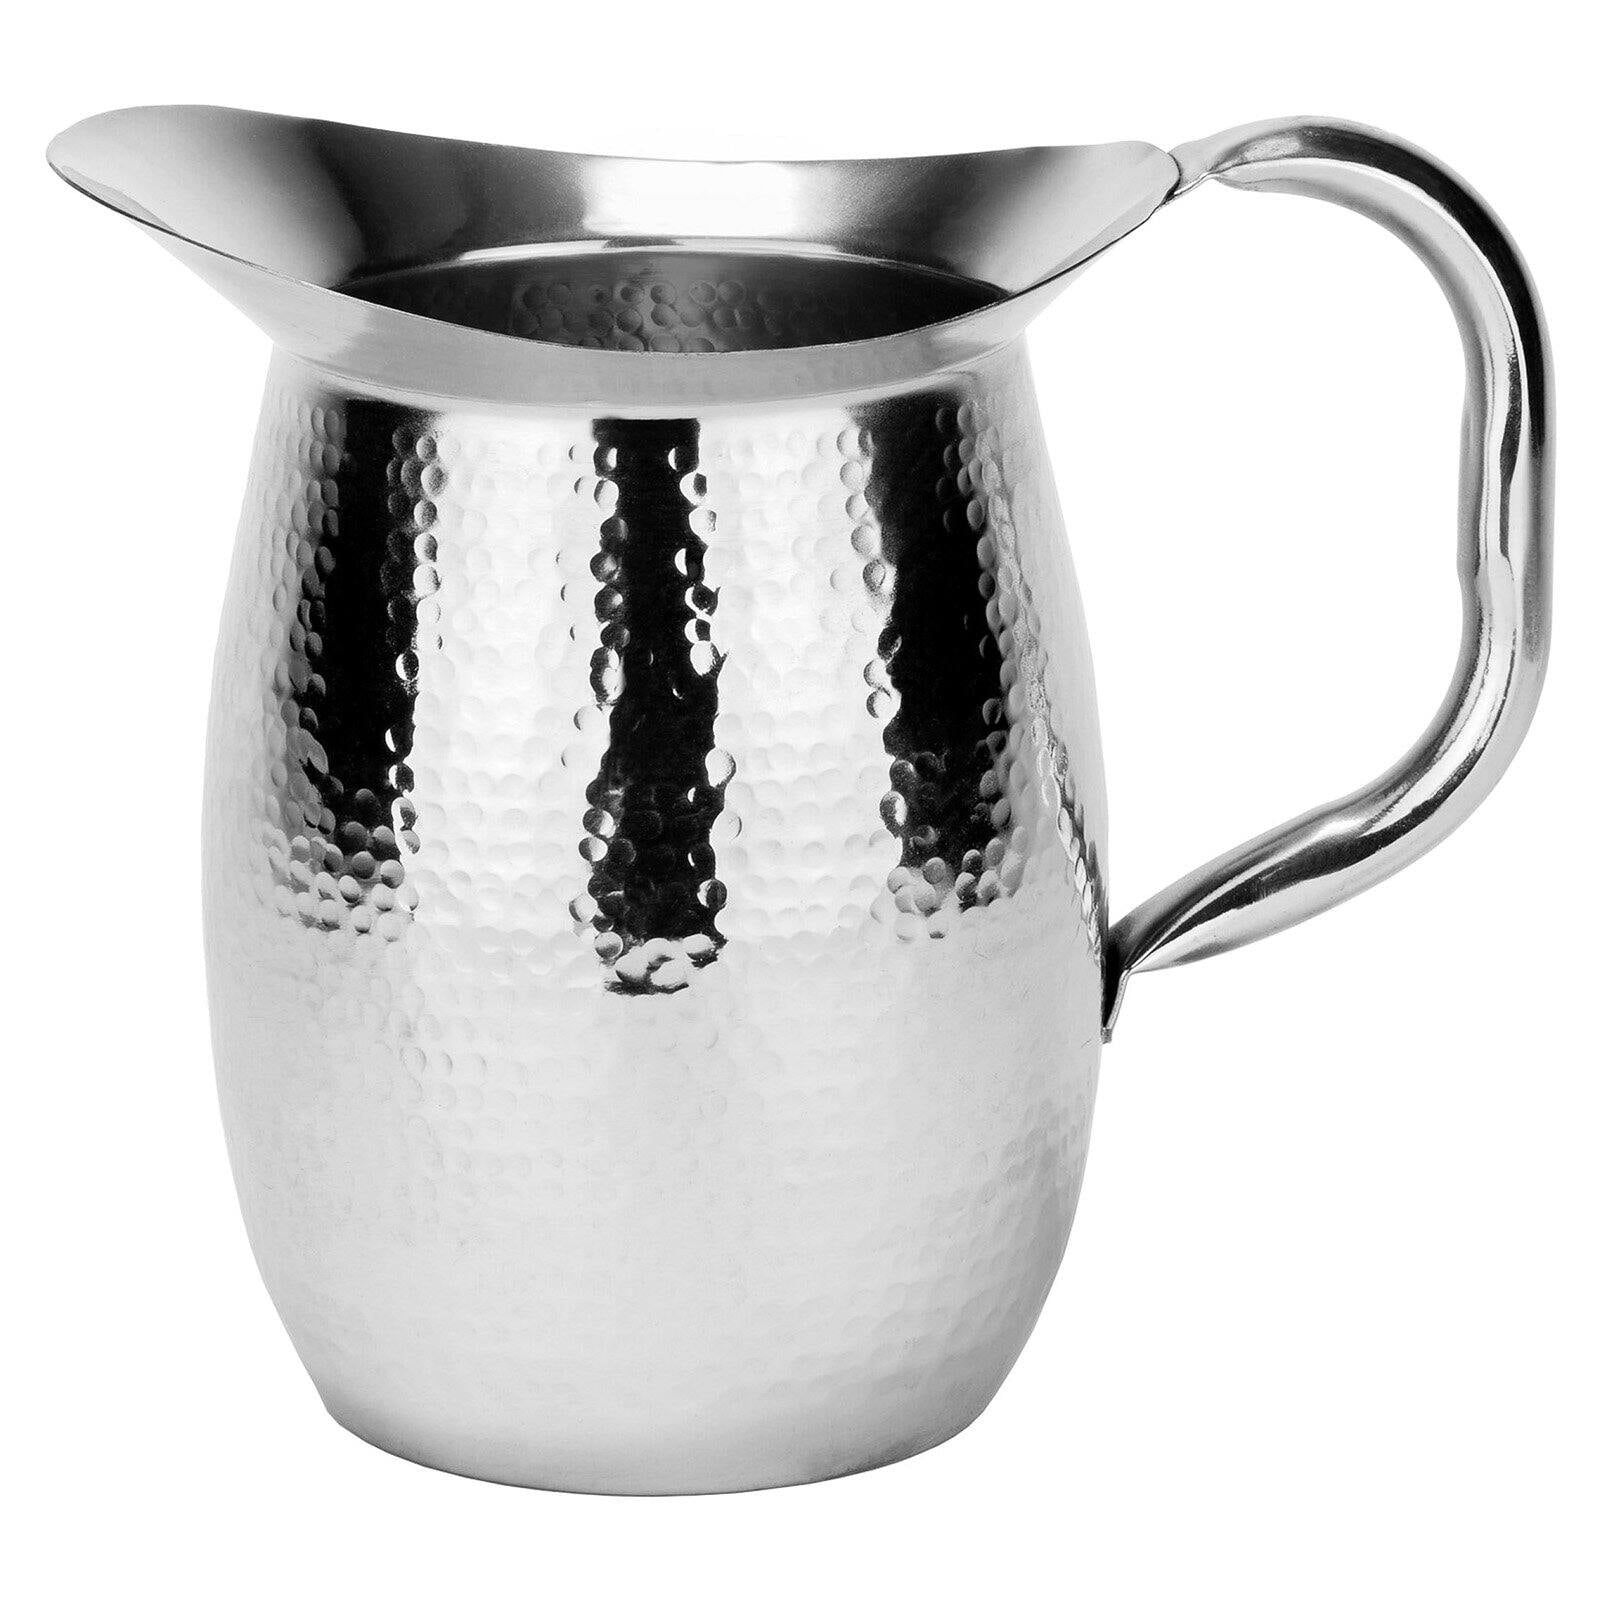 2-quart Double Wall Stainless Steel Hammered Pitcher » NUCU